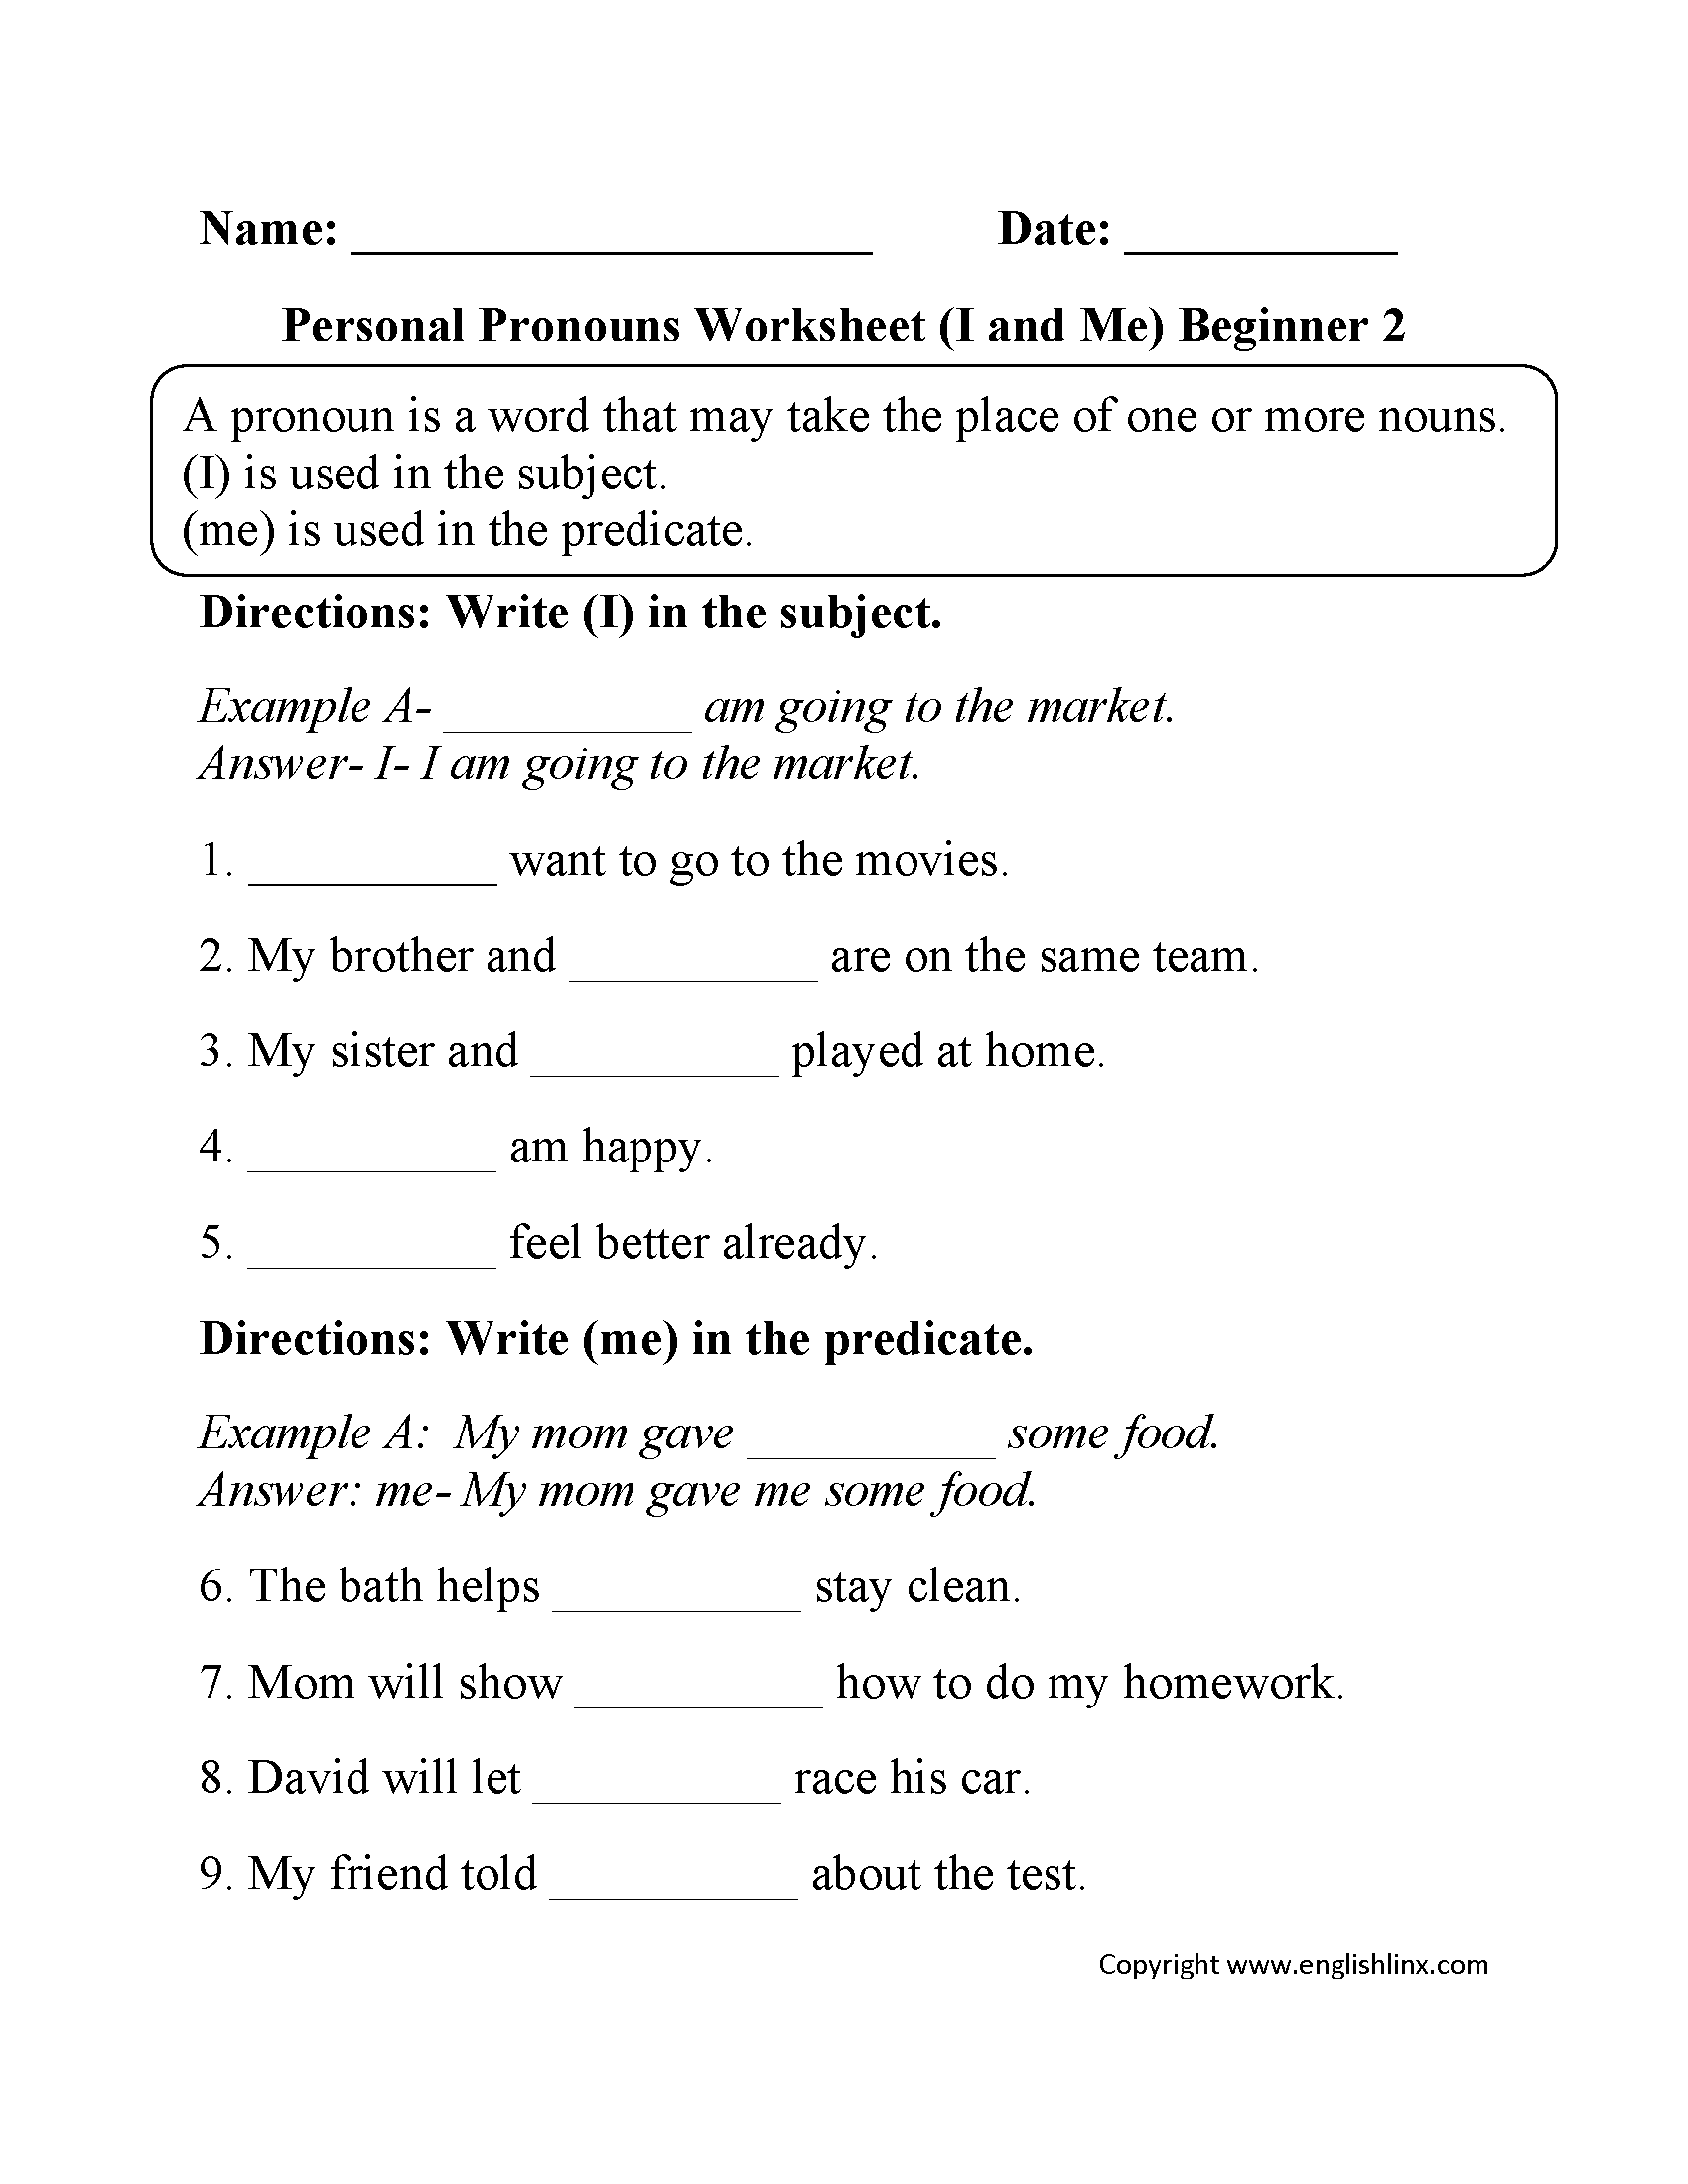 I and Me Personal Pronouns Worksheets Part 2 Beginner